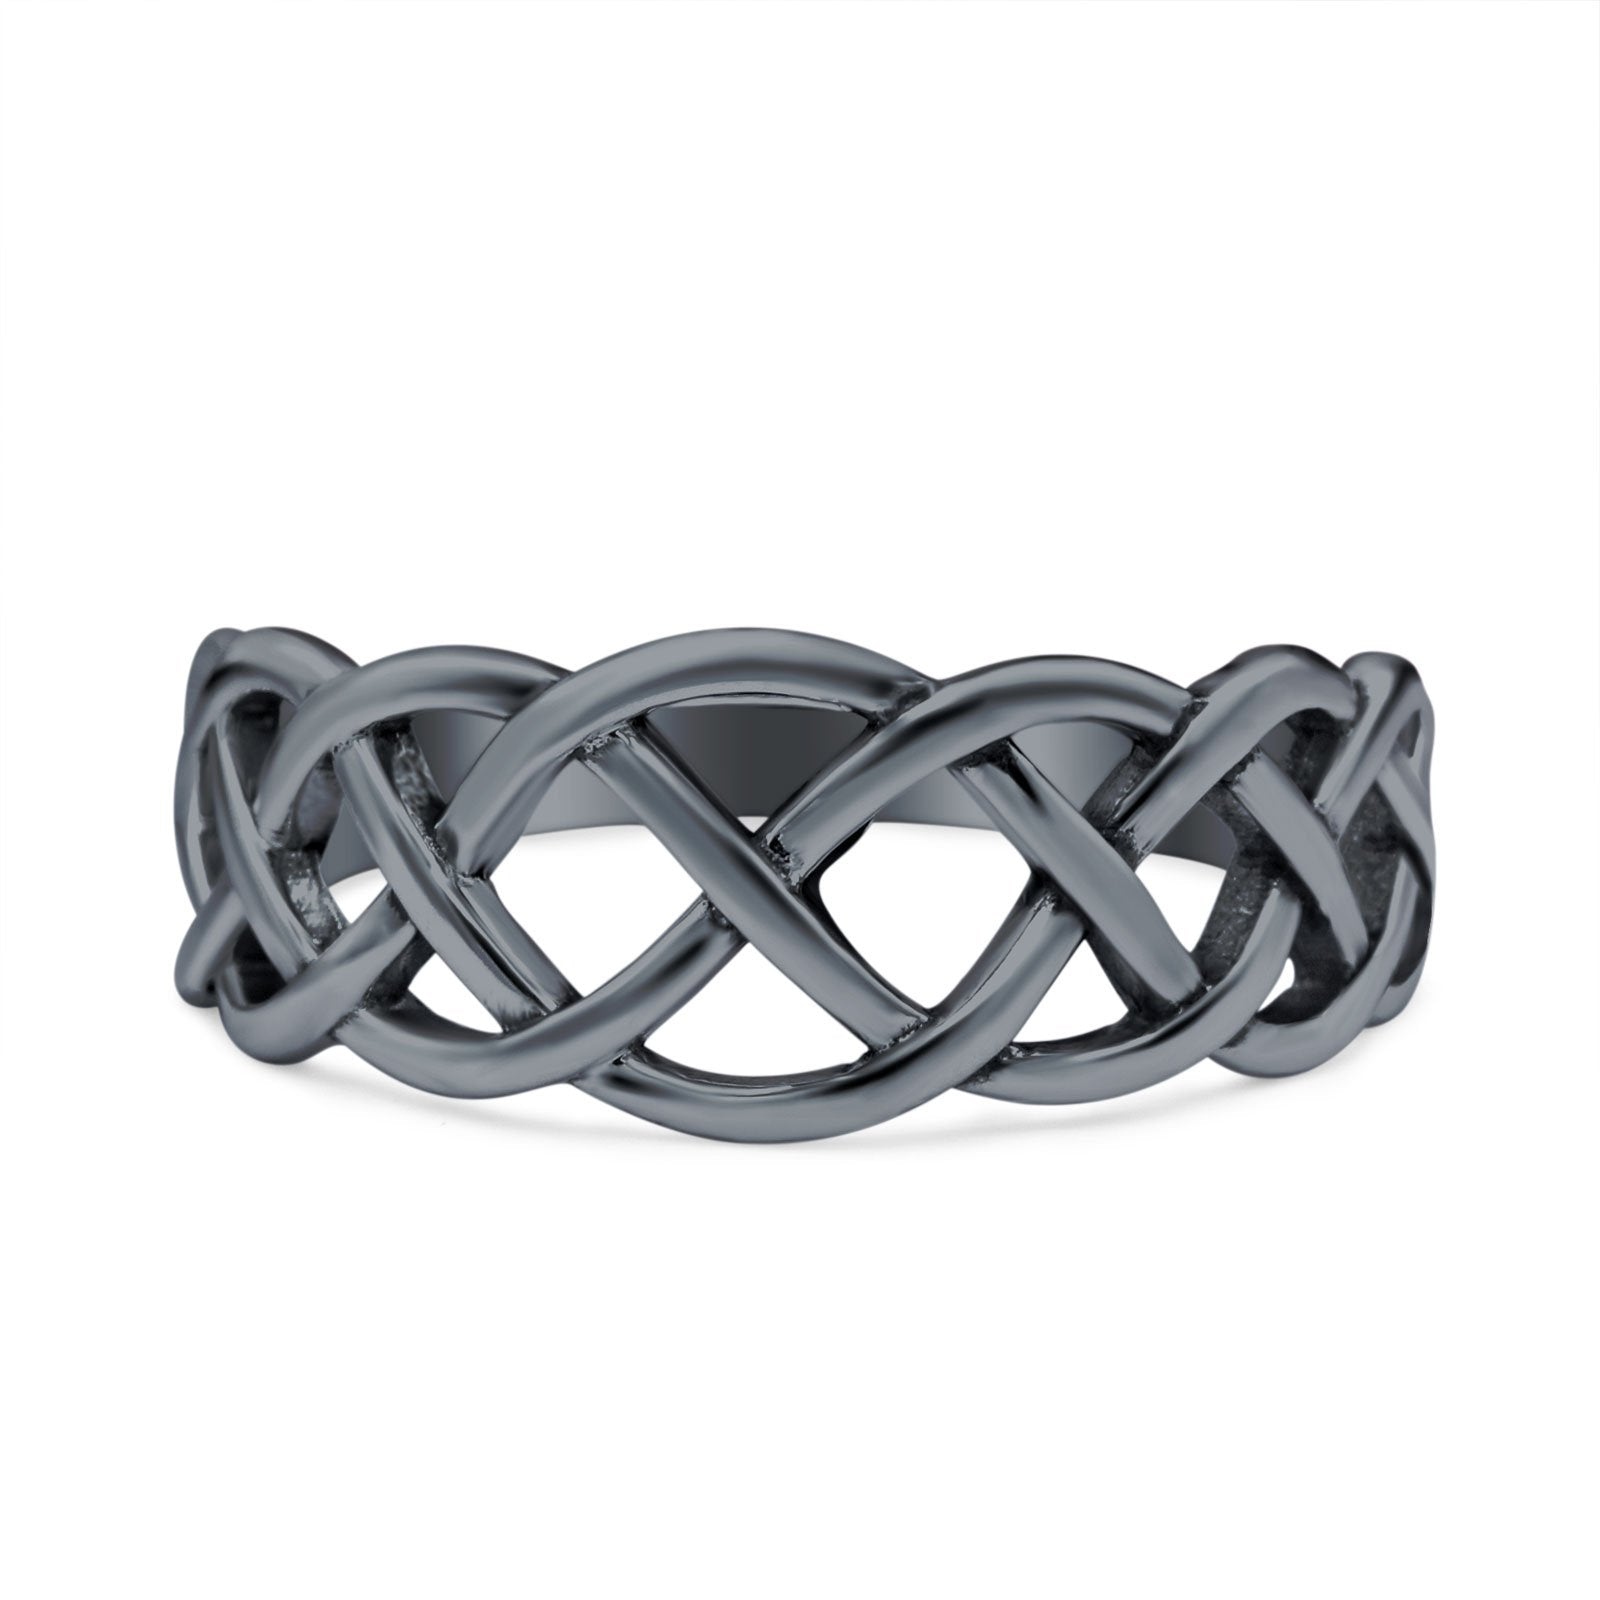 Infinity Braided Oxidized Band Ring Solid 925 Sterling Silver(8mm)